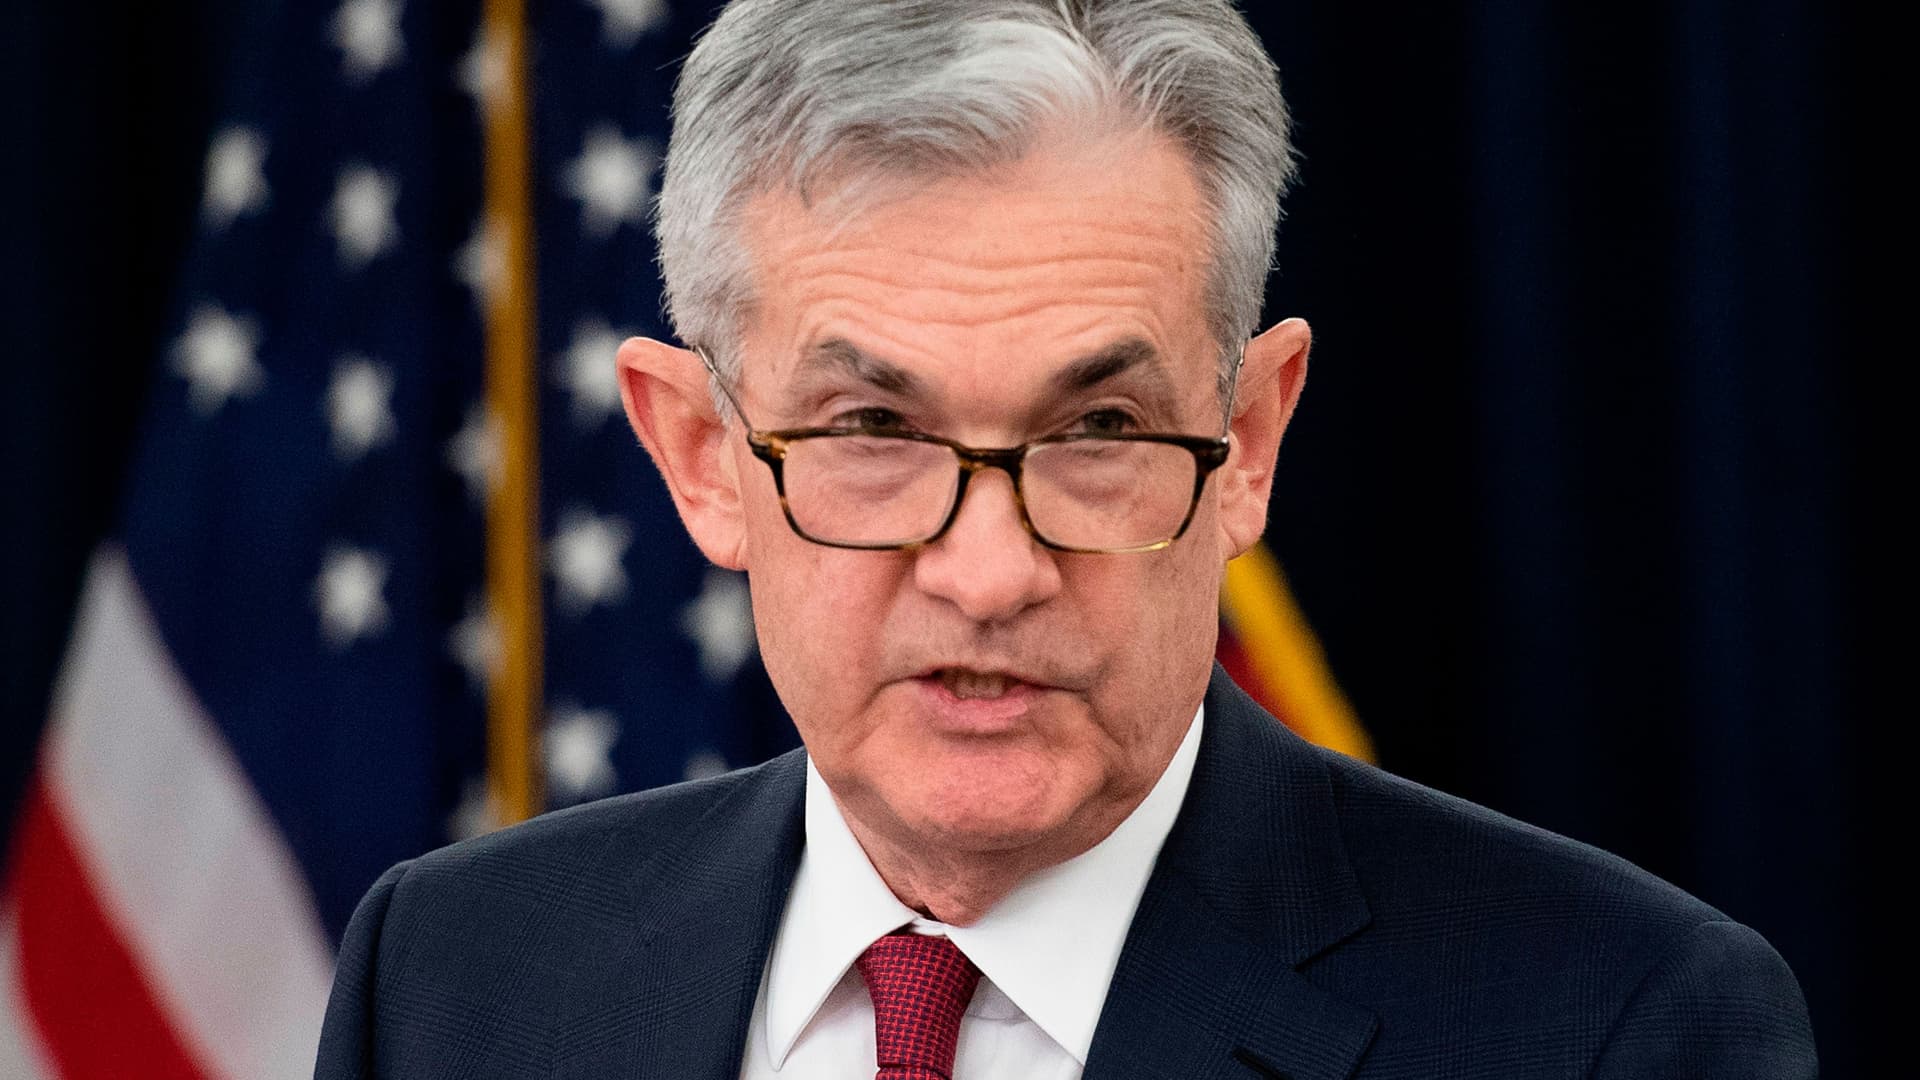 US Federal Reserve Board Chairman Jerome Powell holds a news conference after a Federal Open Market Committee meeting in Washington, DC, December 19, 2018.